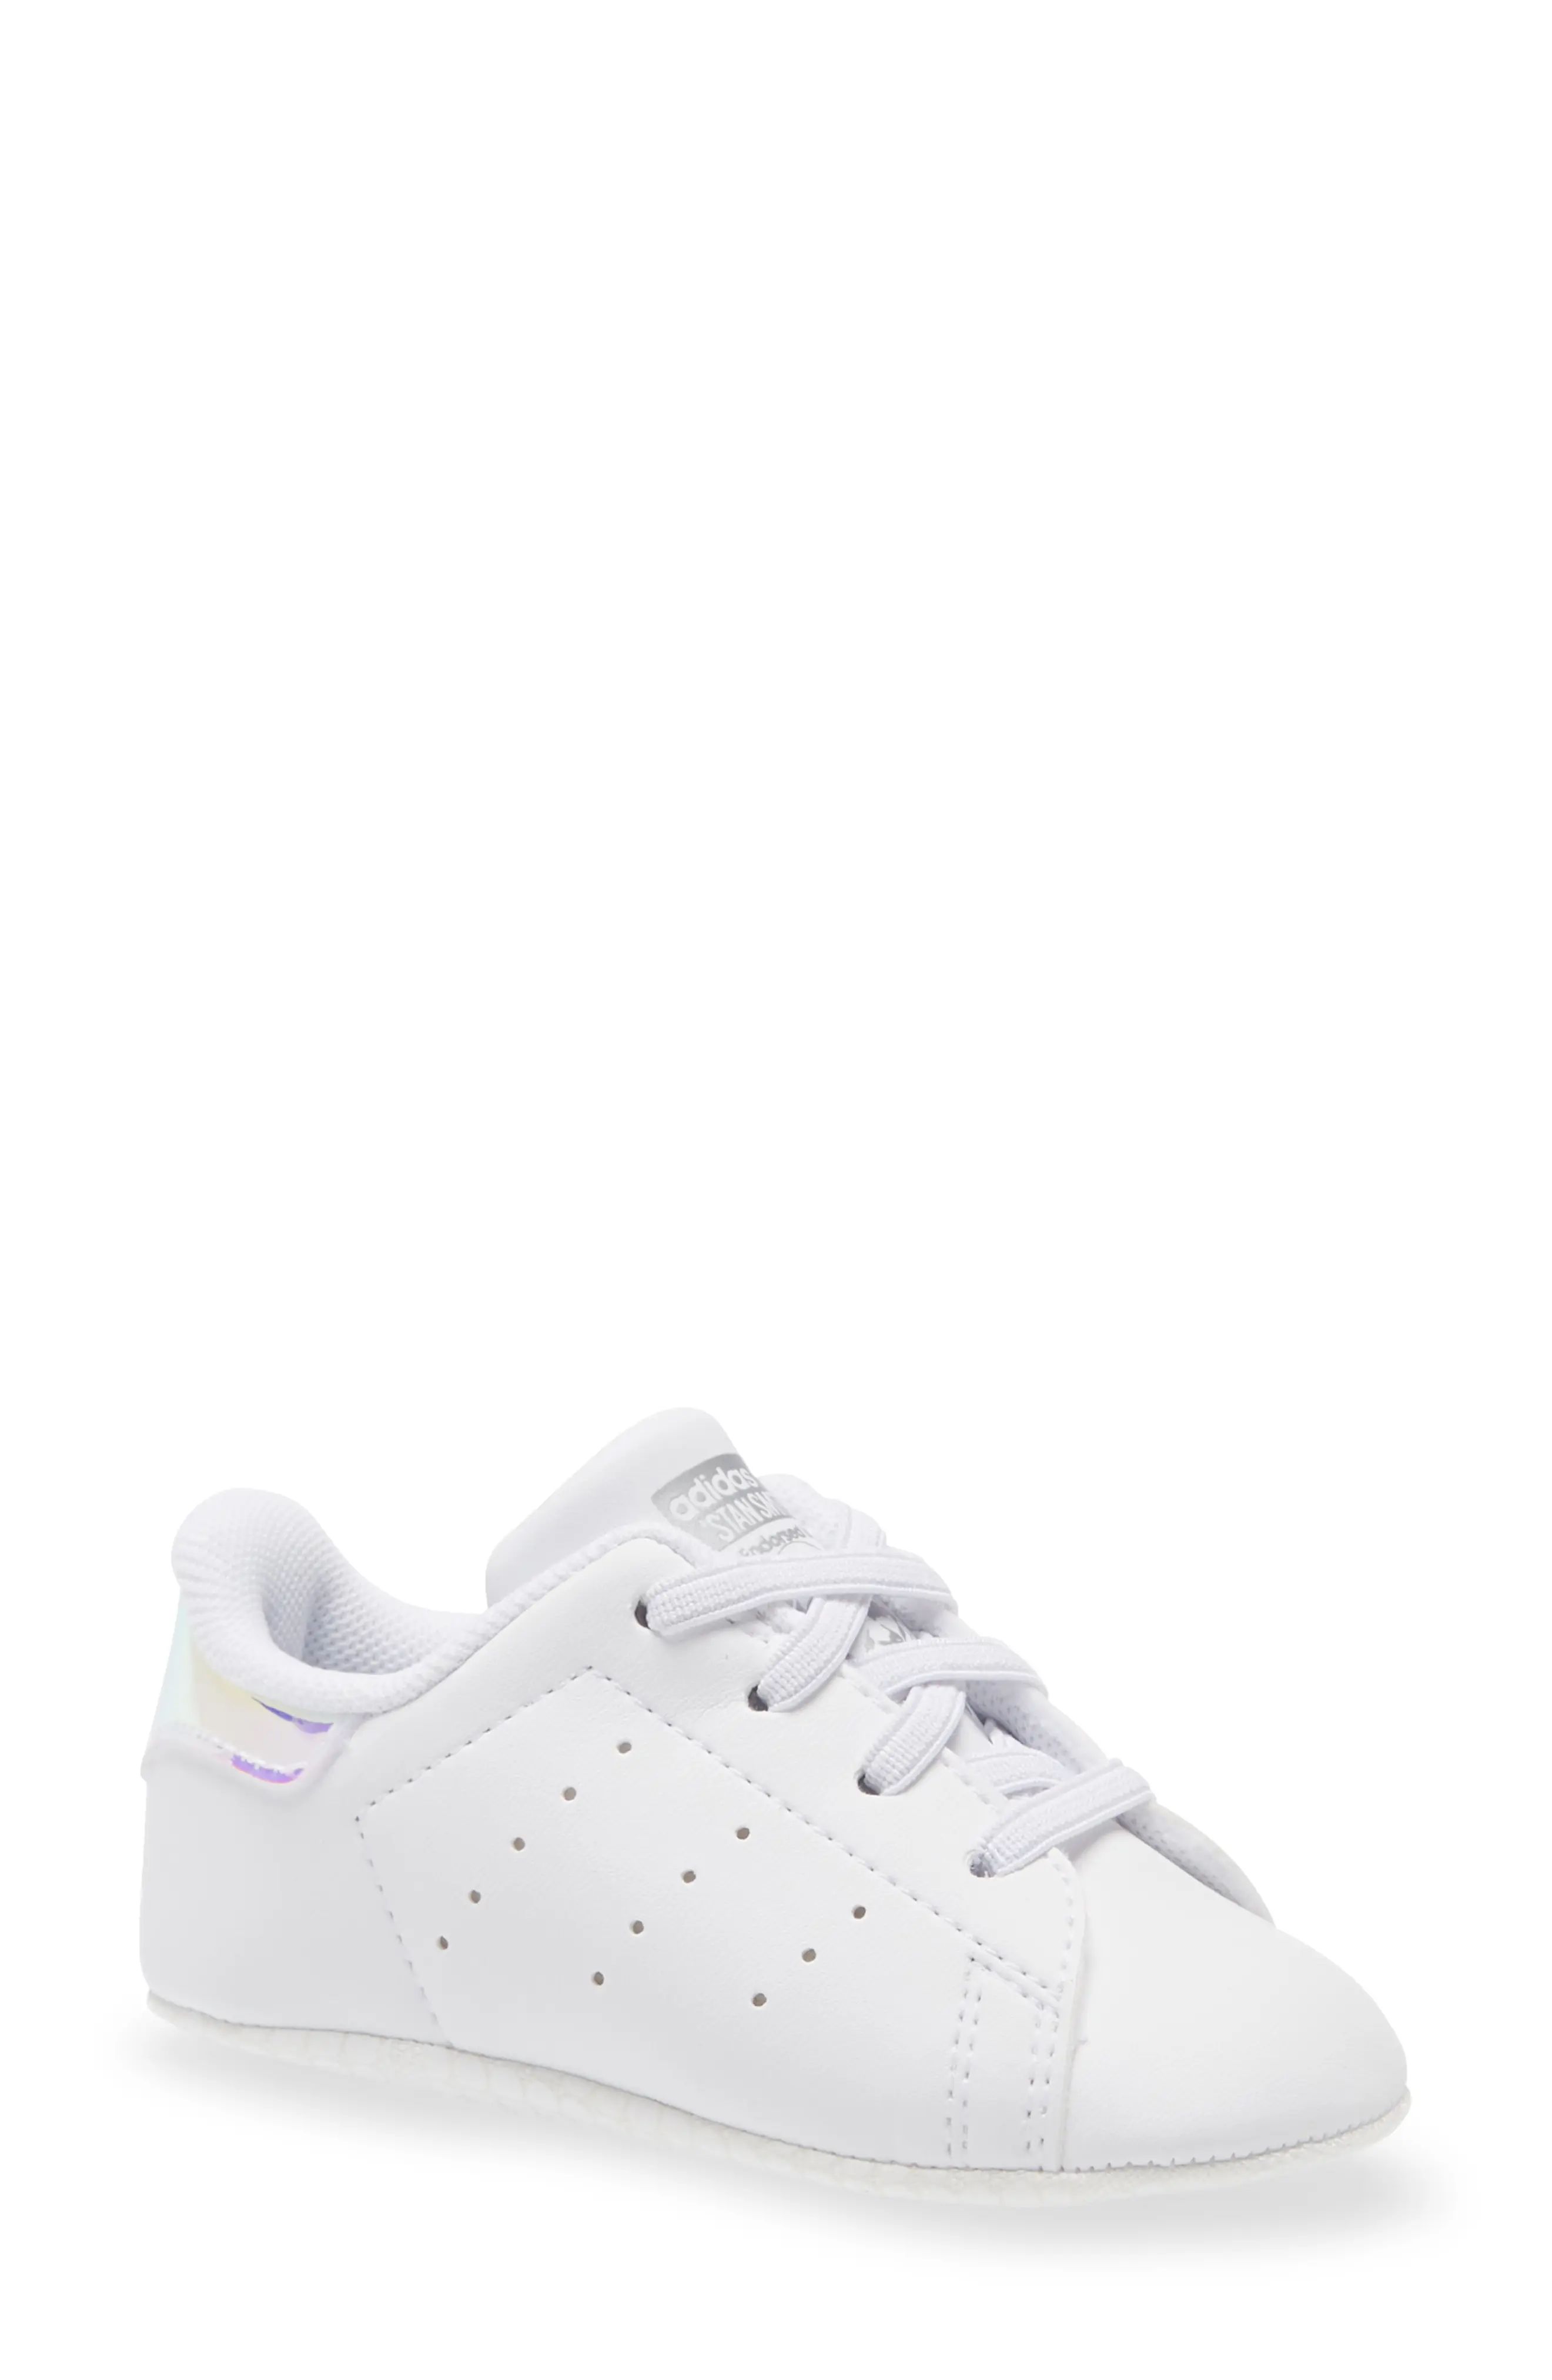 adidas Stan Smith Crib Sneaker in White/silver at Nordstrom, Size 3 M | Nordstrom